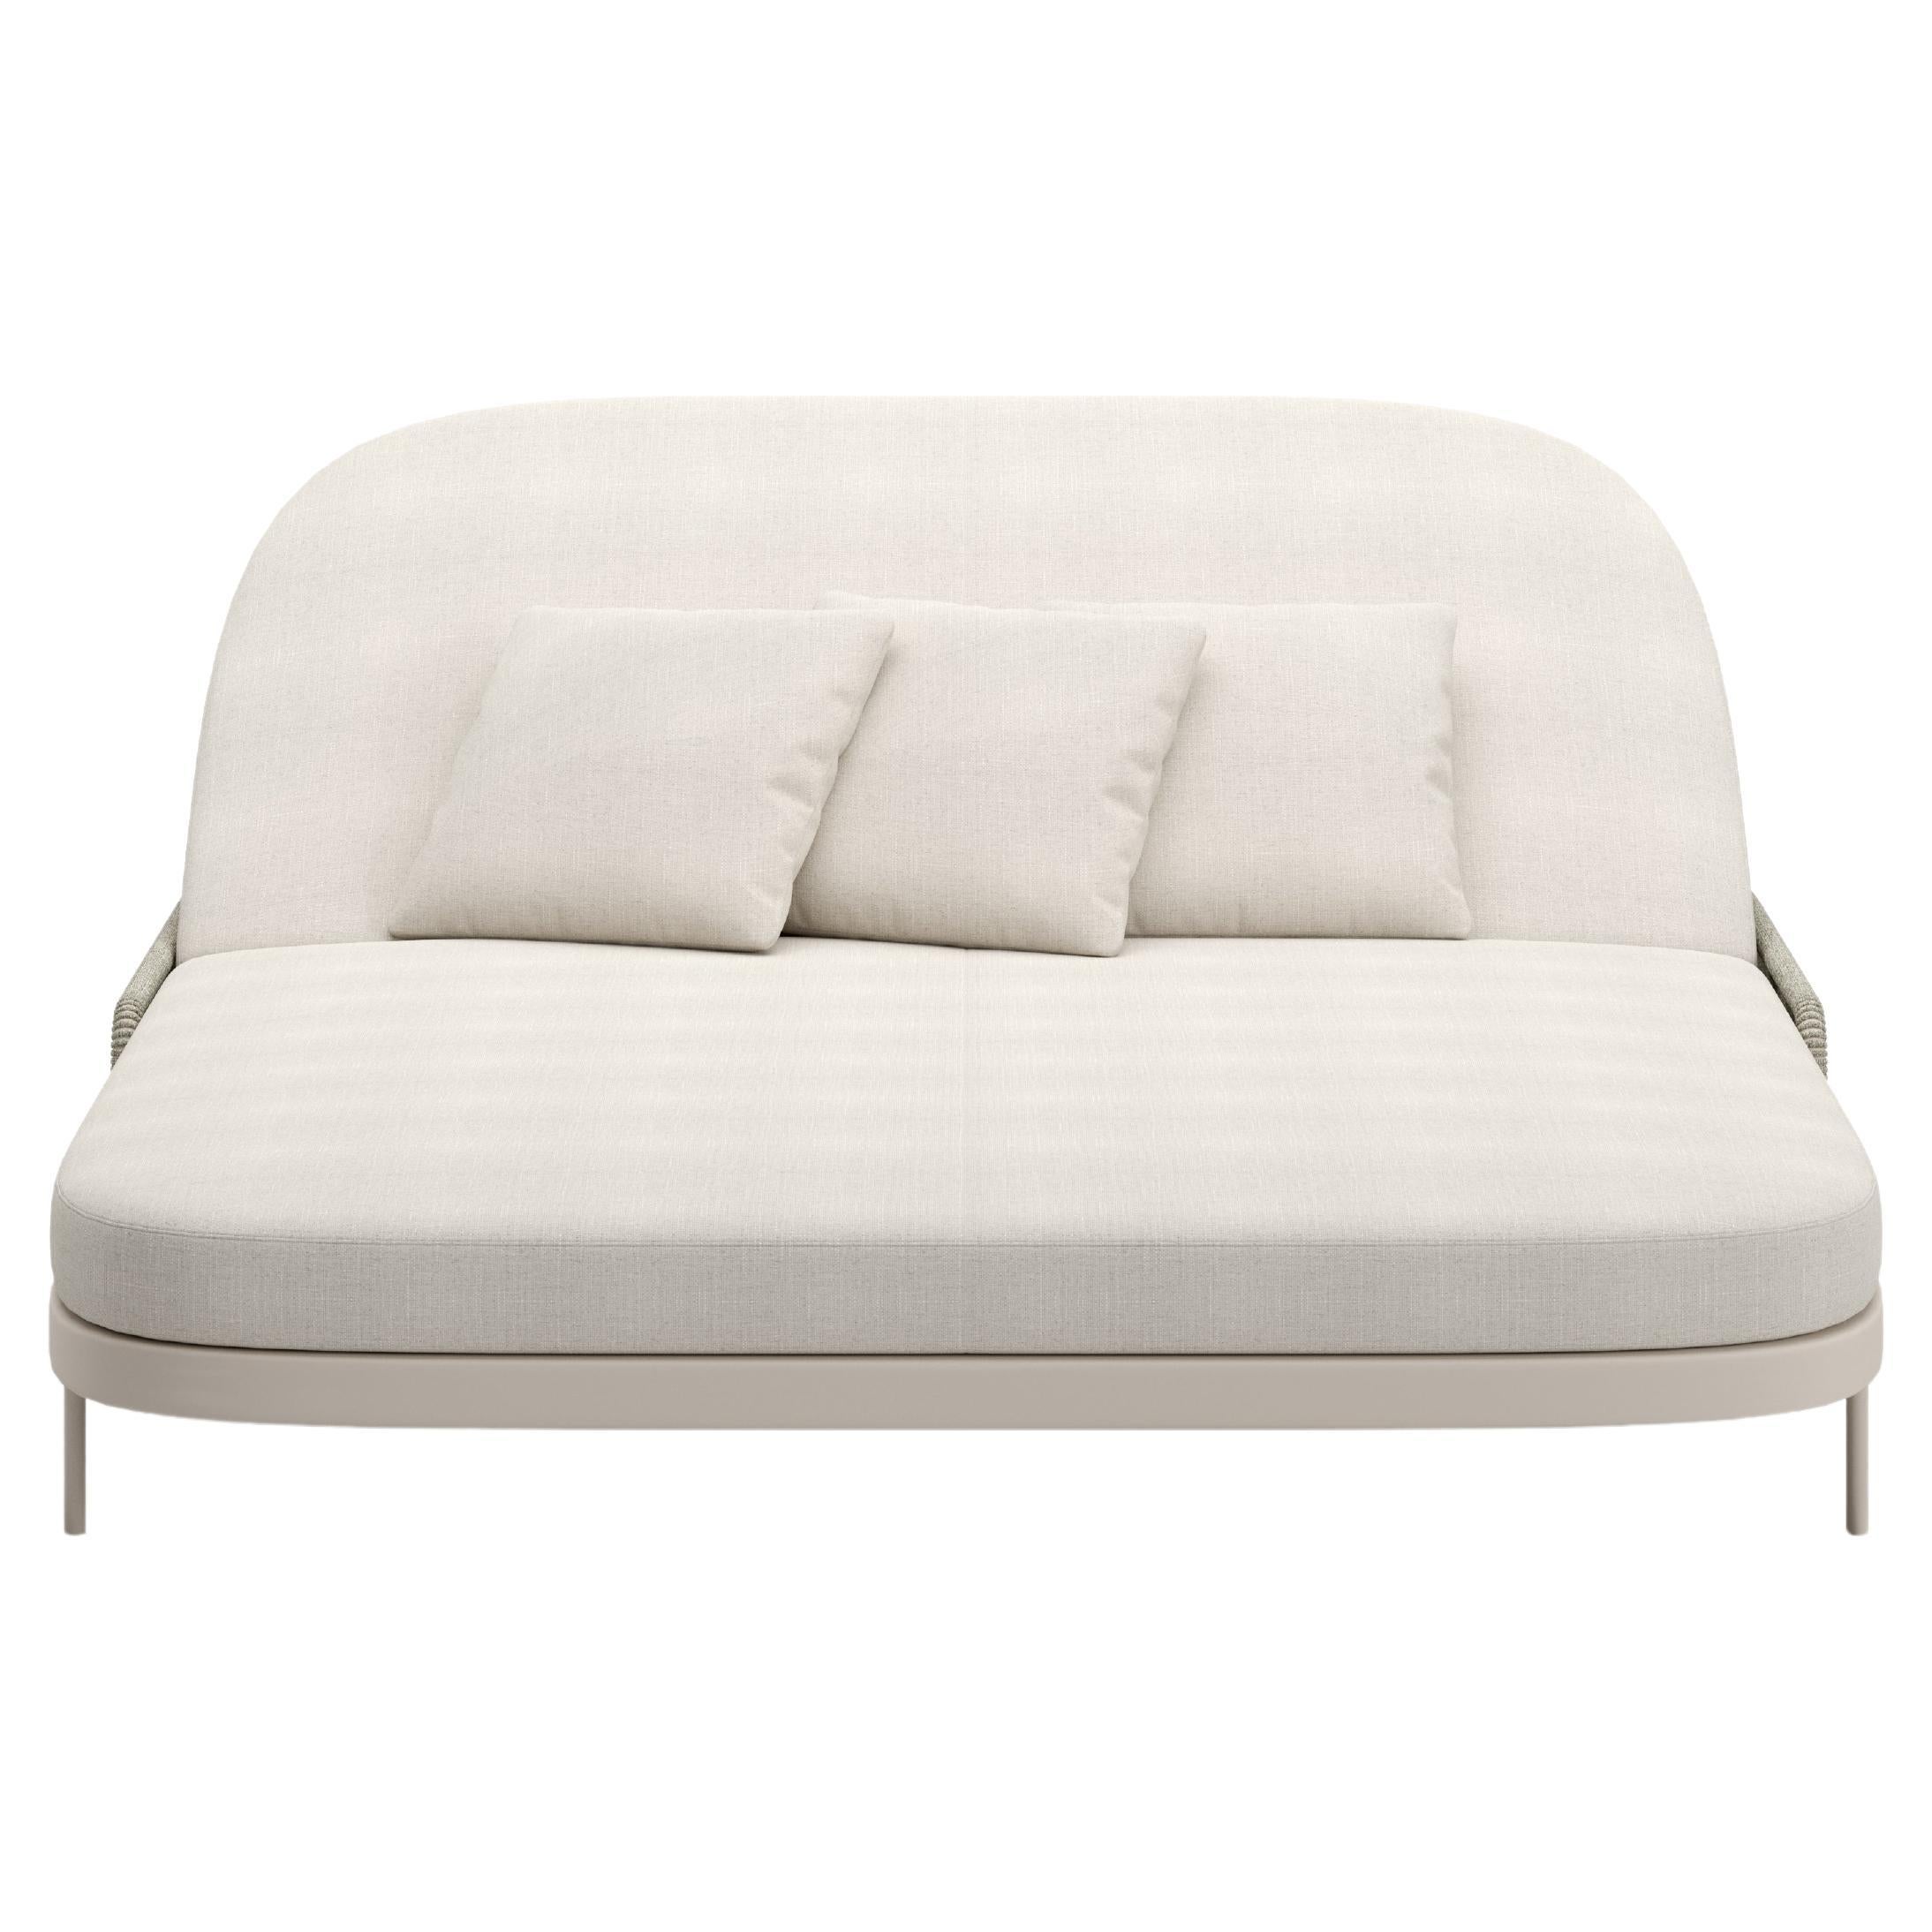 Miura-bisque Daybed by SNOC For Sale